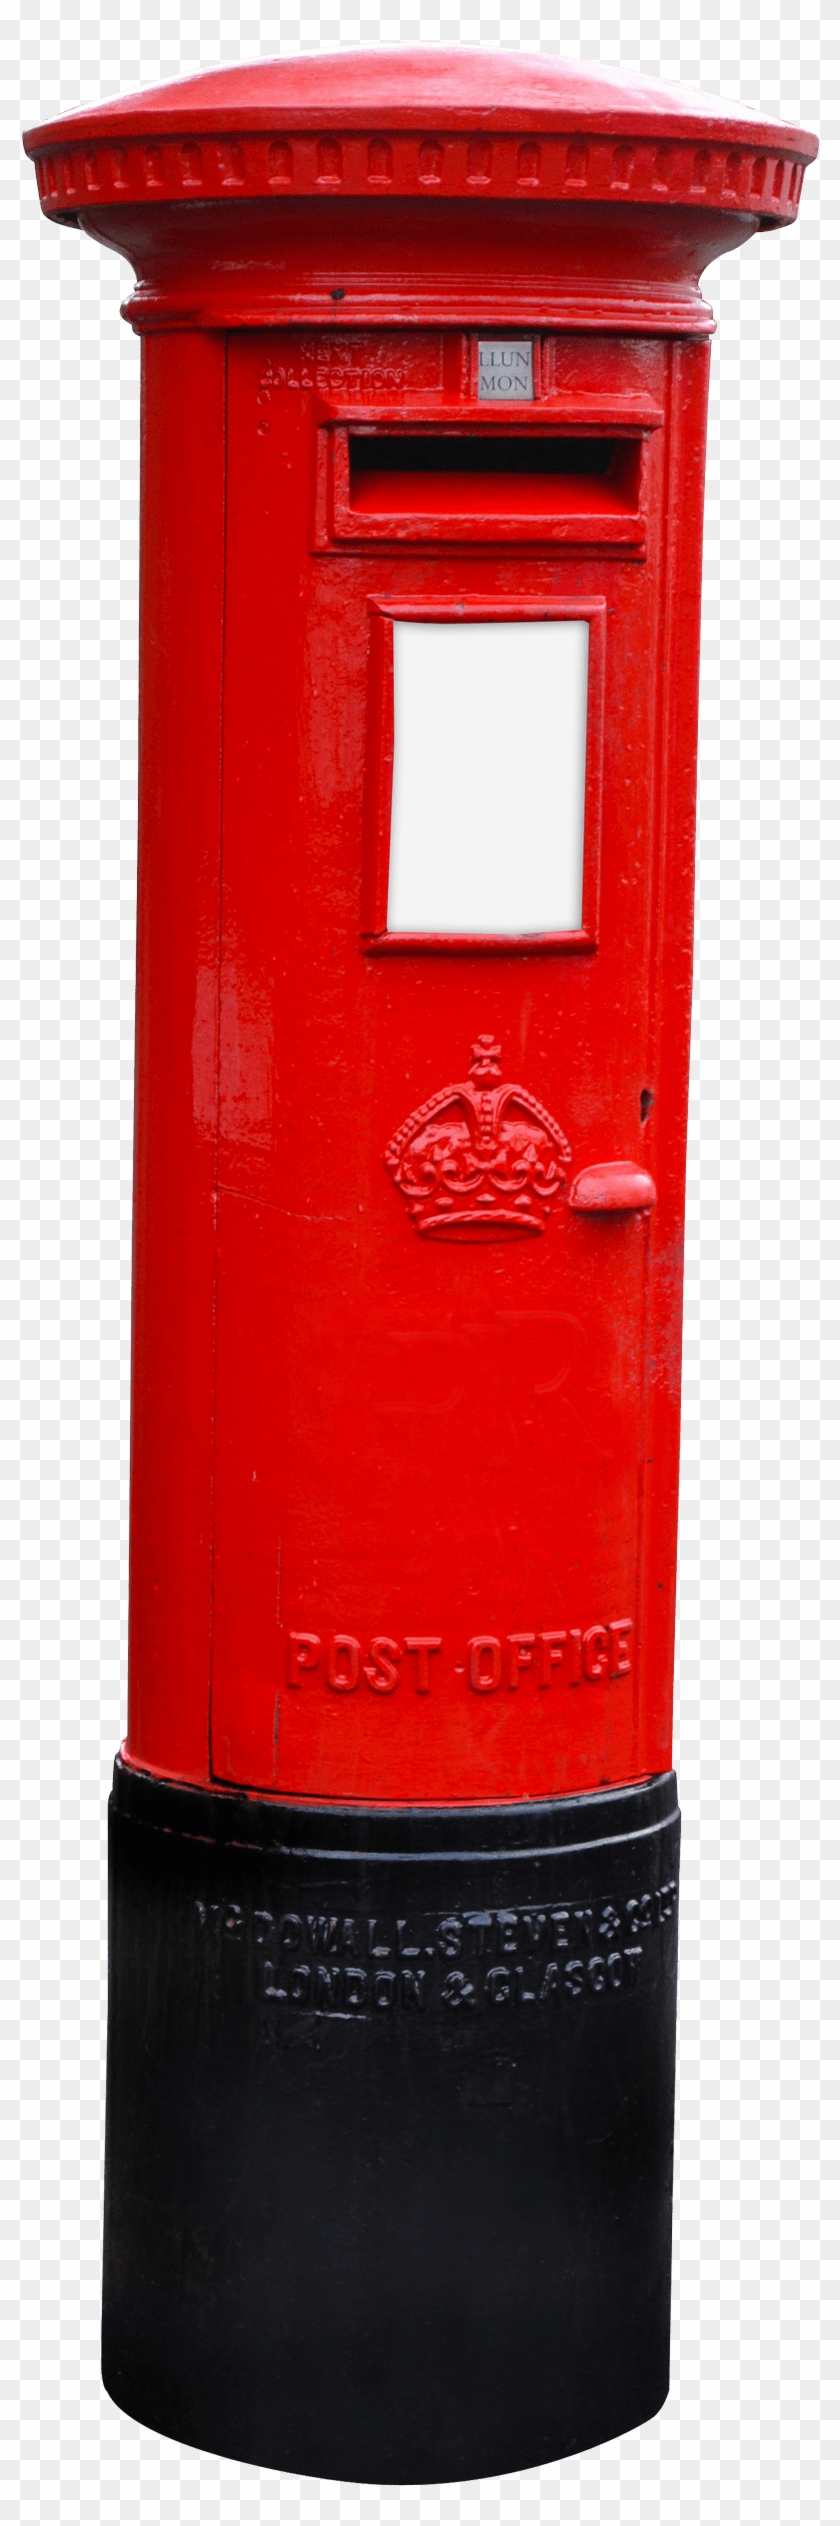 Cylinder Postbox - Old Post Box Clipart #94373